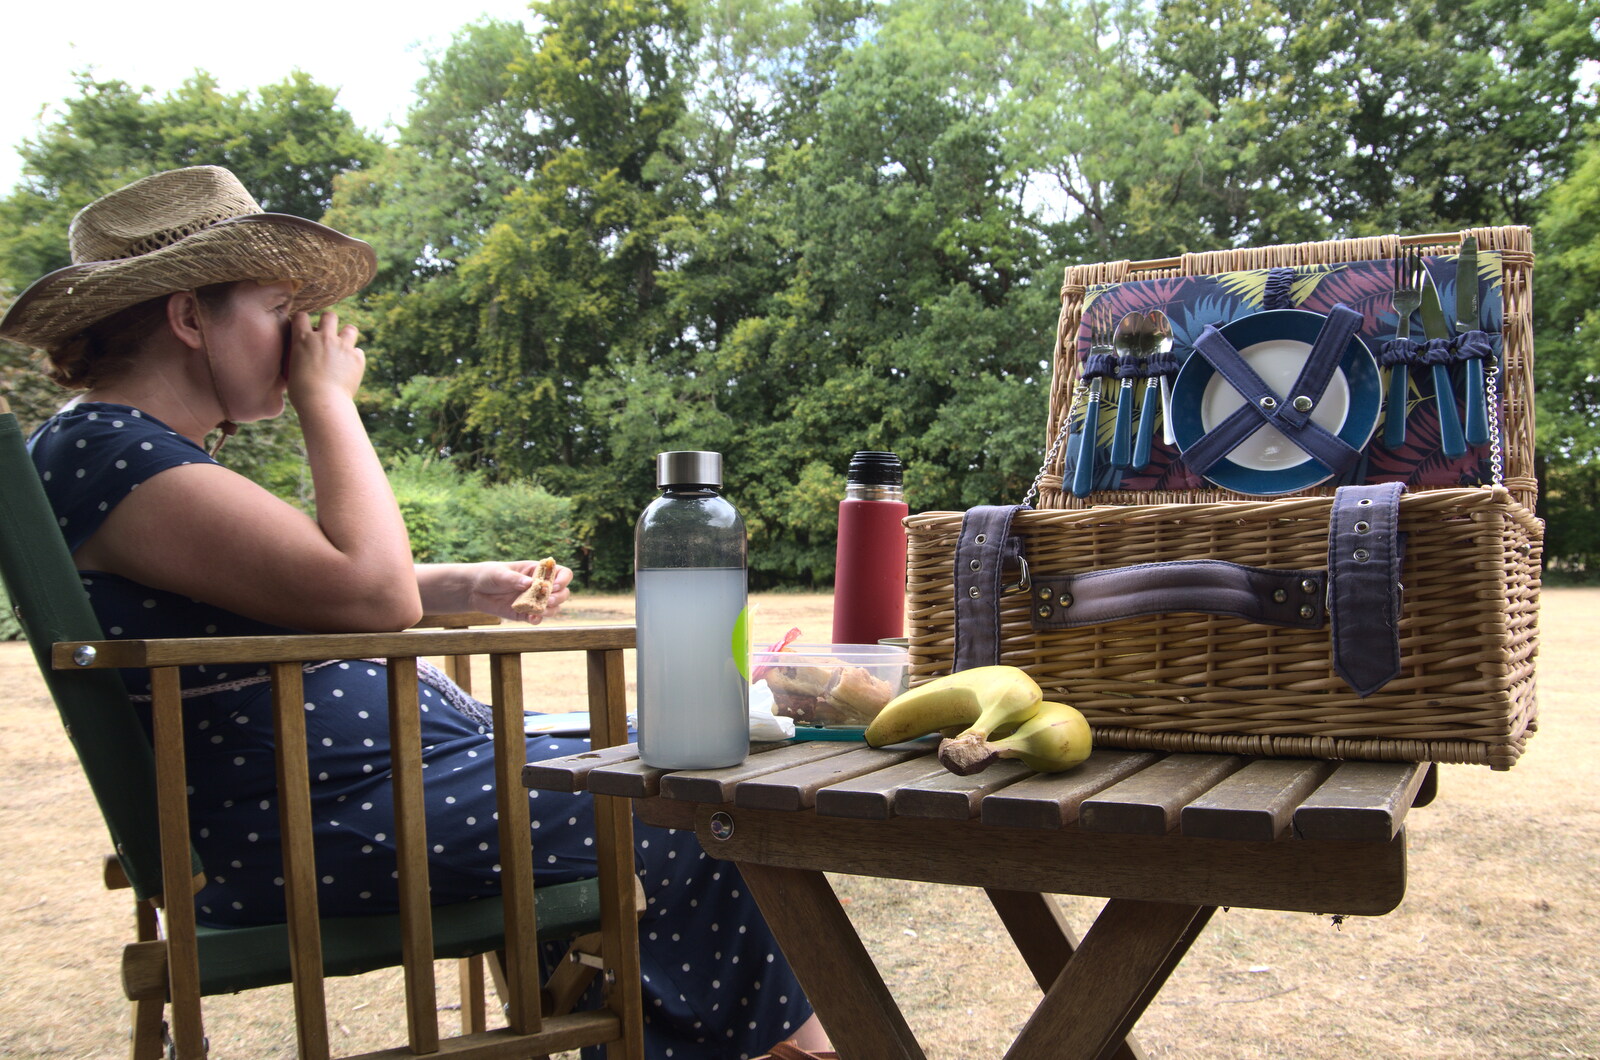 We stop for a picnic on some parched grass from Anglesey Abbey and a #StandWithUkraine Demo, Cambridge - 24th August 2022